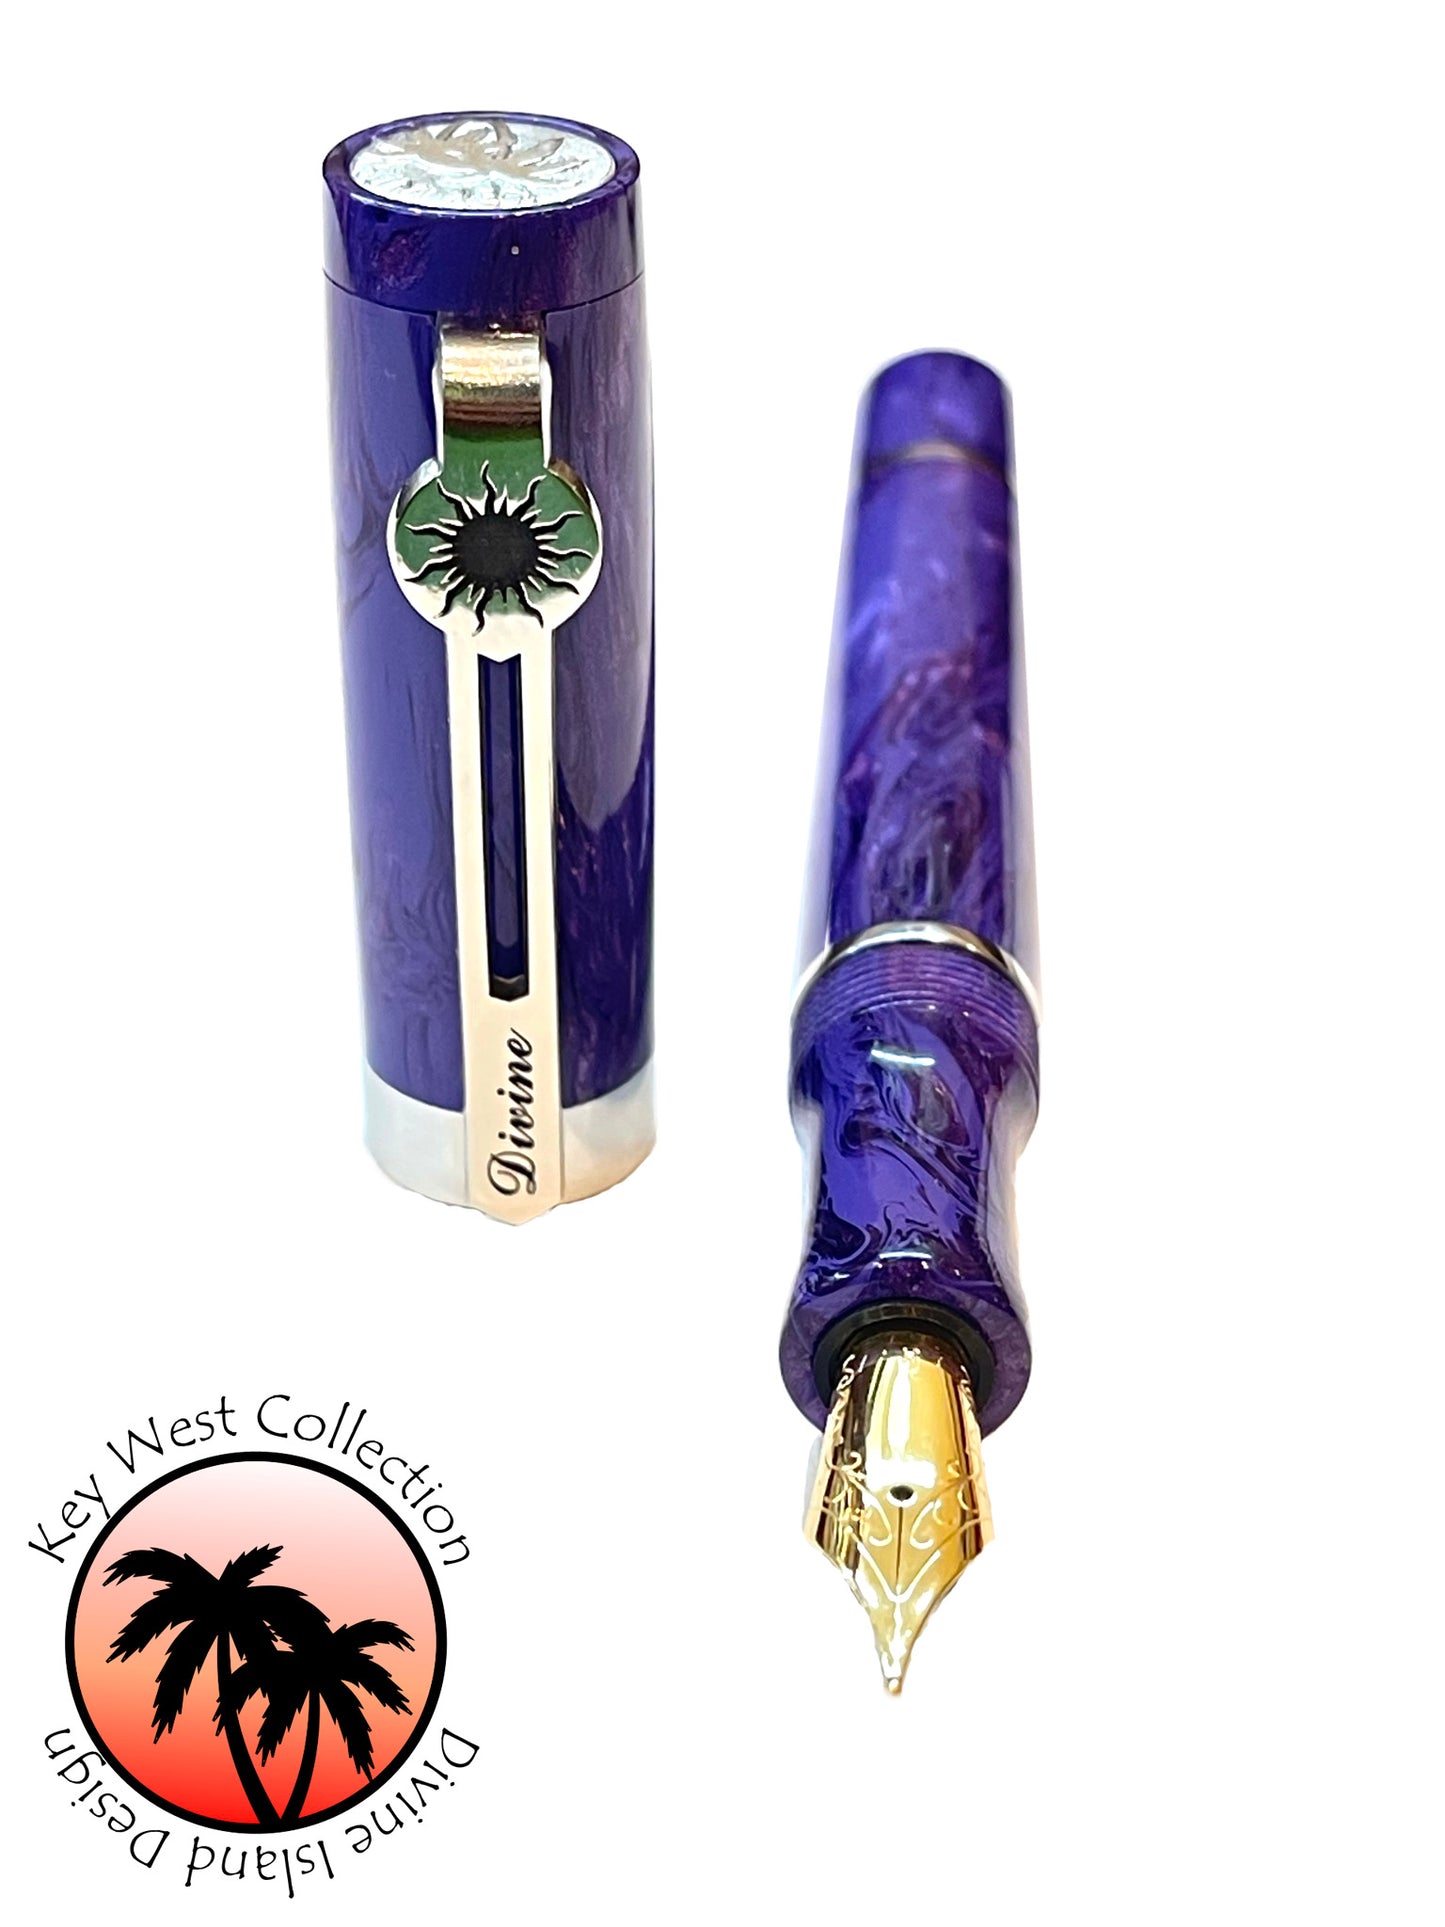 Key West Collection Fountain Pen - "Nightlife"